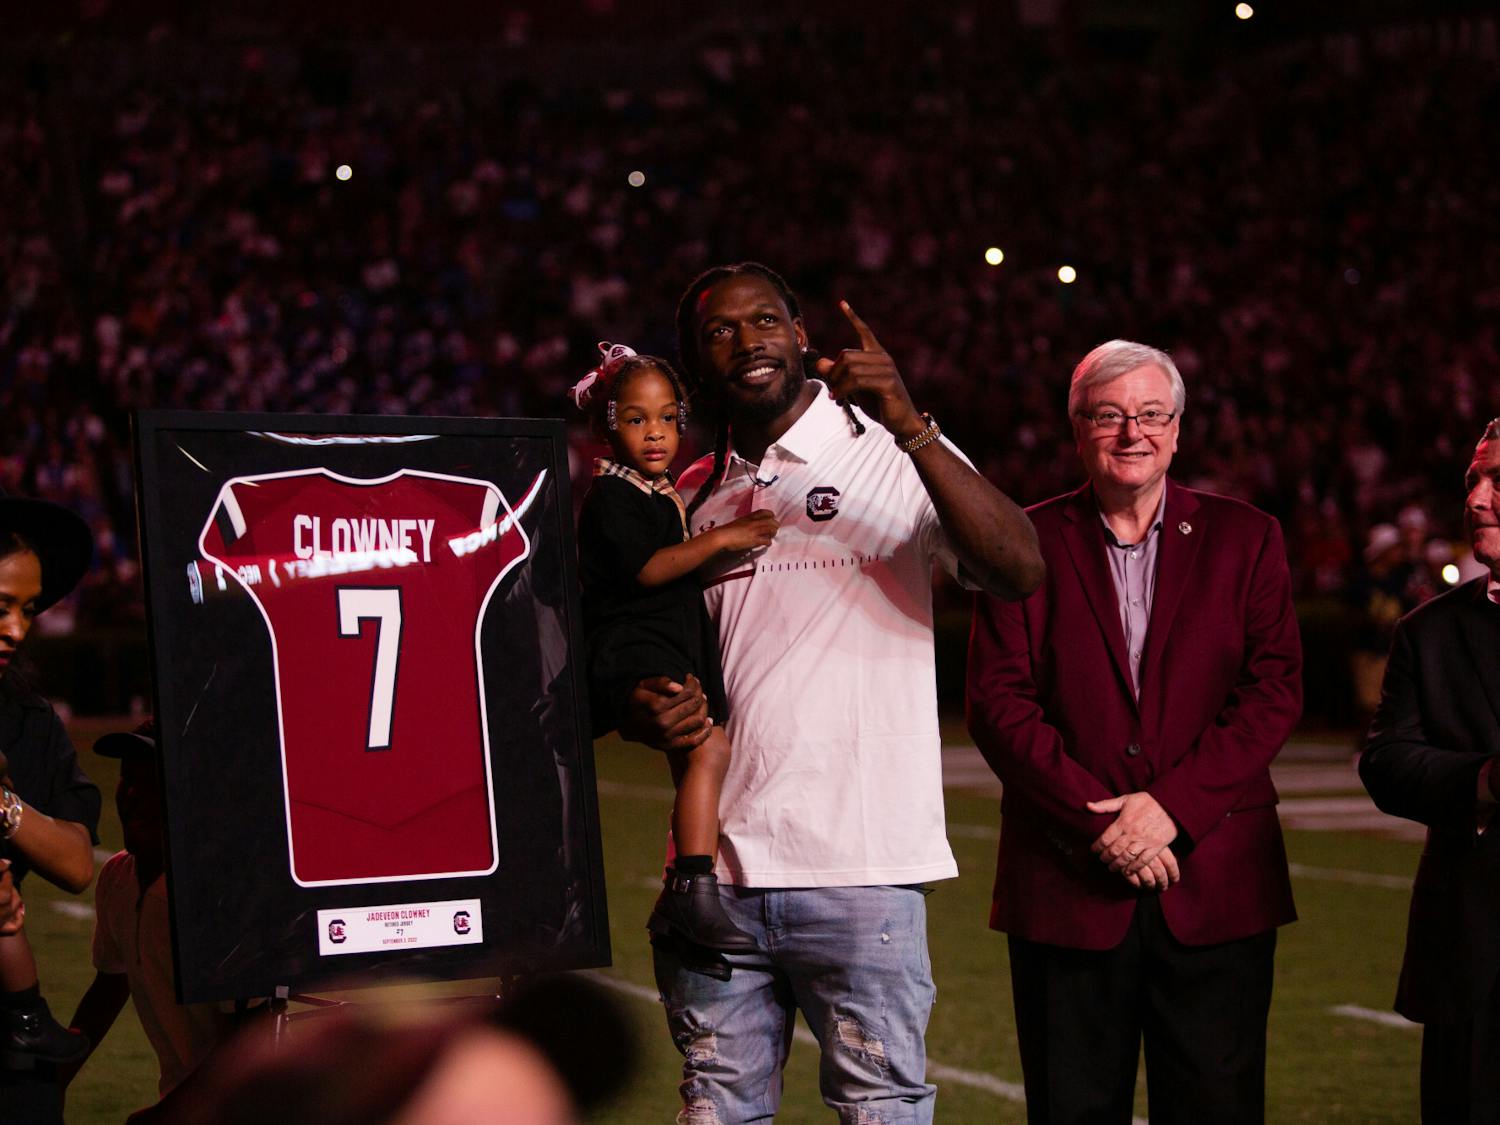 Jadeveon Clowney, a former Gamecock defensive end, points at a new sign of his name. Clowney's jersey was retired during the game against Georgia State on Sept. 3, 2022.  